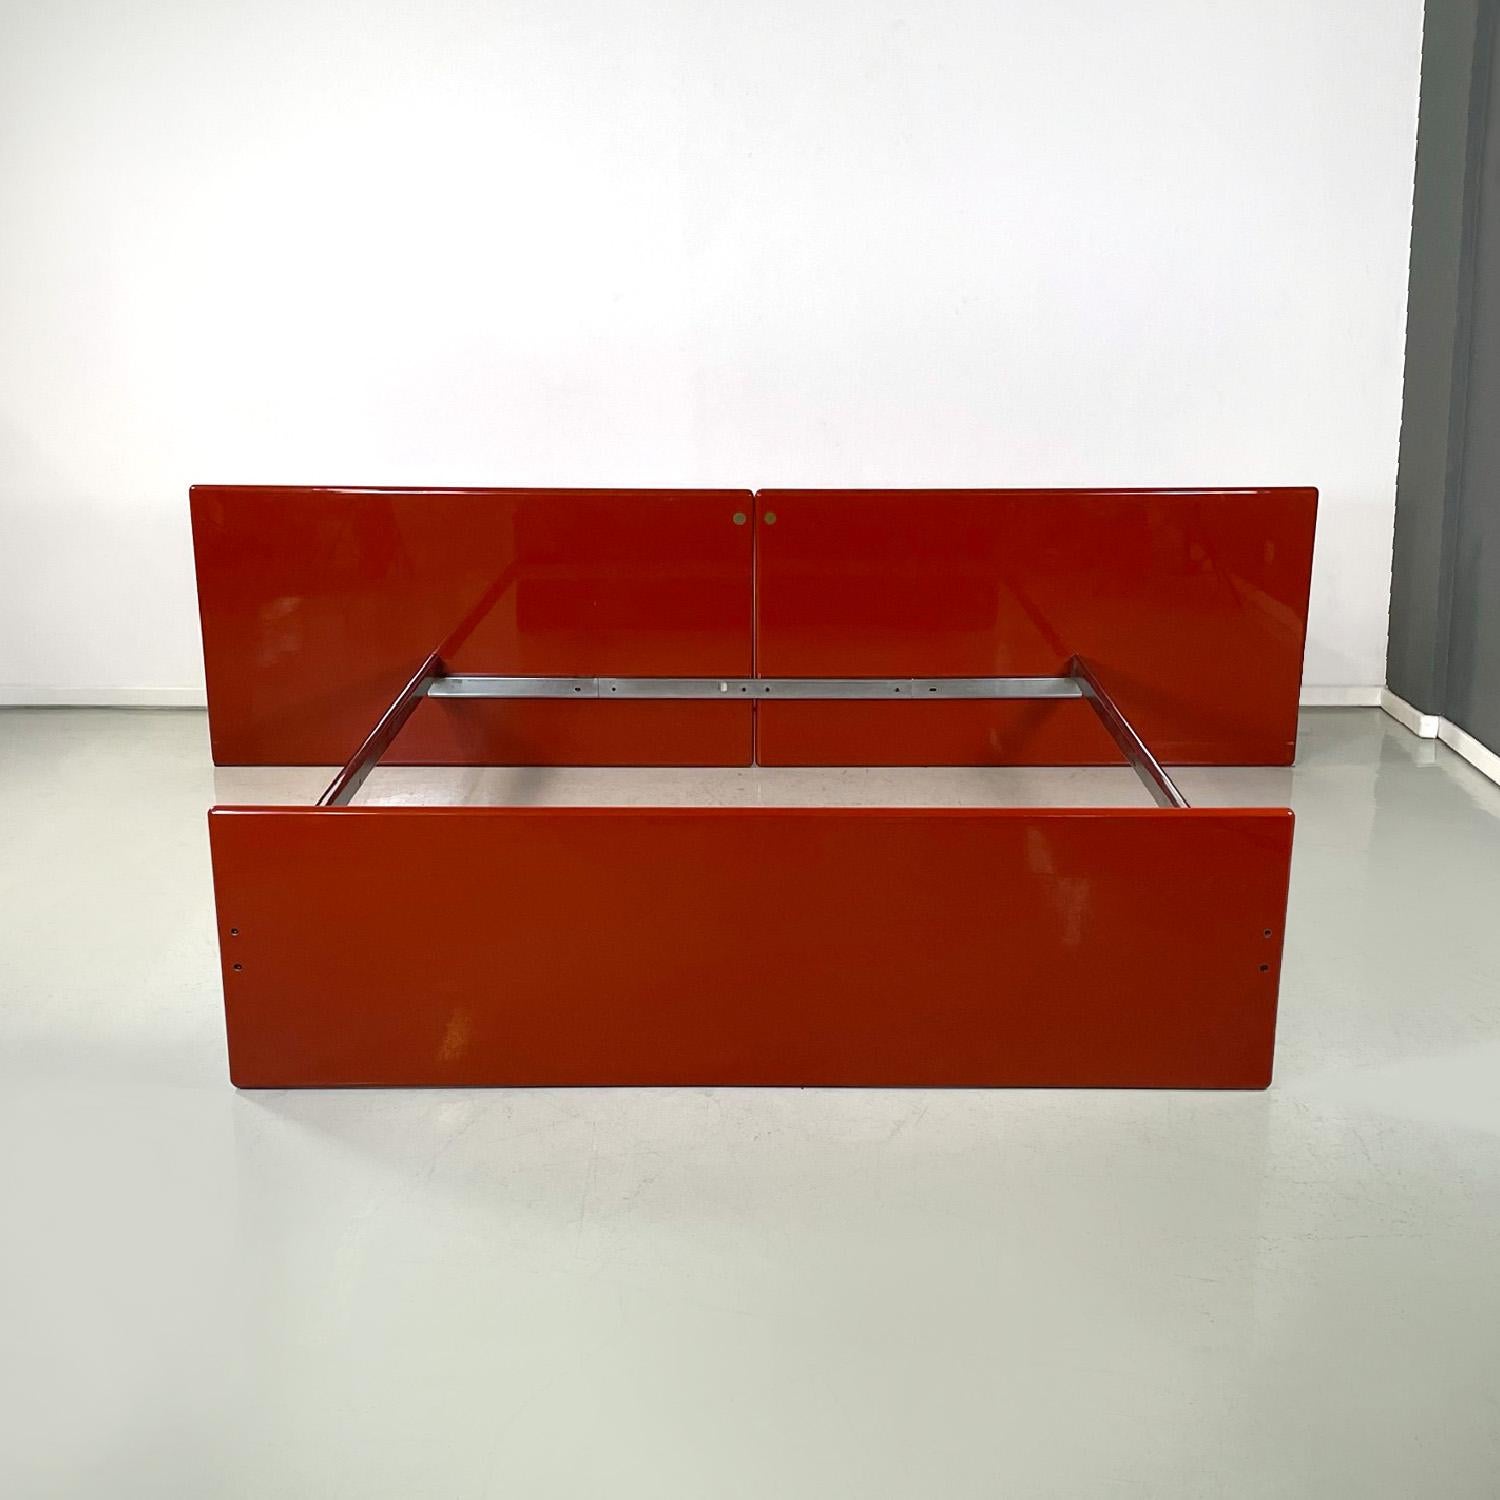 Italian modern red lacquered wood metal bed by Takahama for Simon Gavina, 1970s
Rectangular bed with vermilion red lacquered wooden structure and metal. The structure that contains the nets is in silver metal. The two panels that make up the